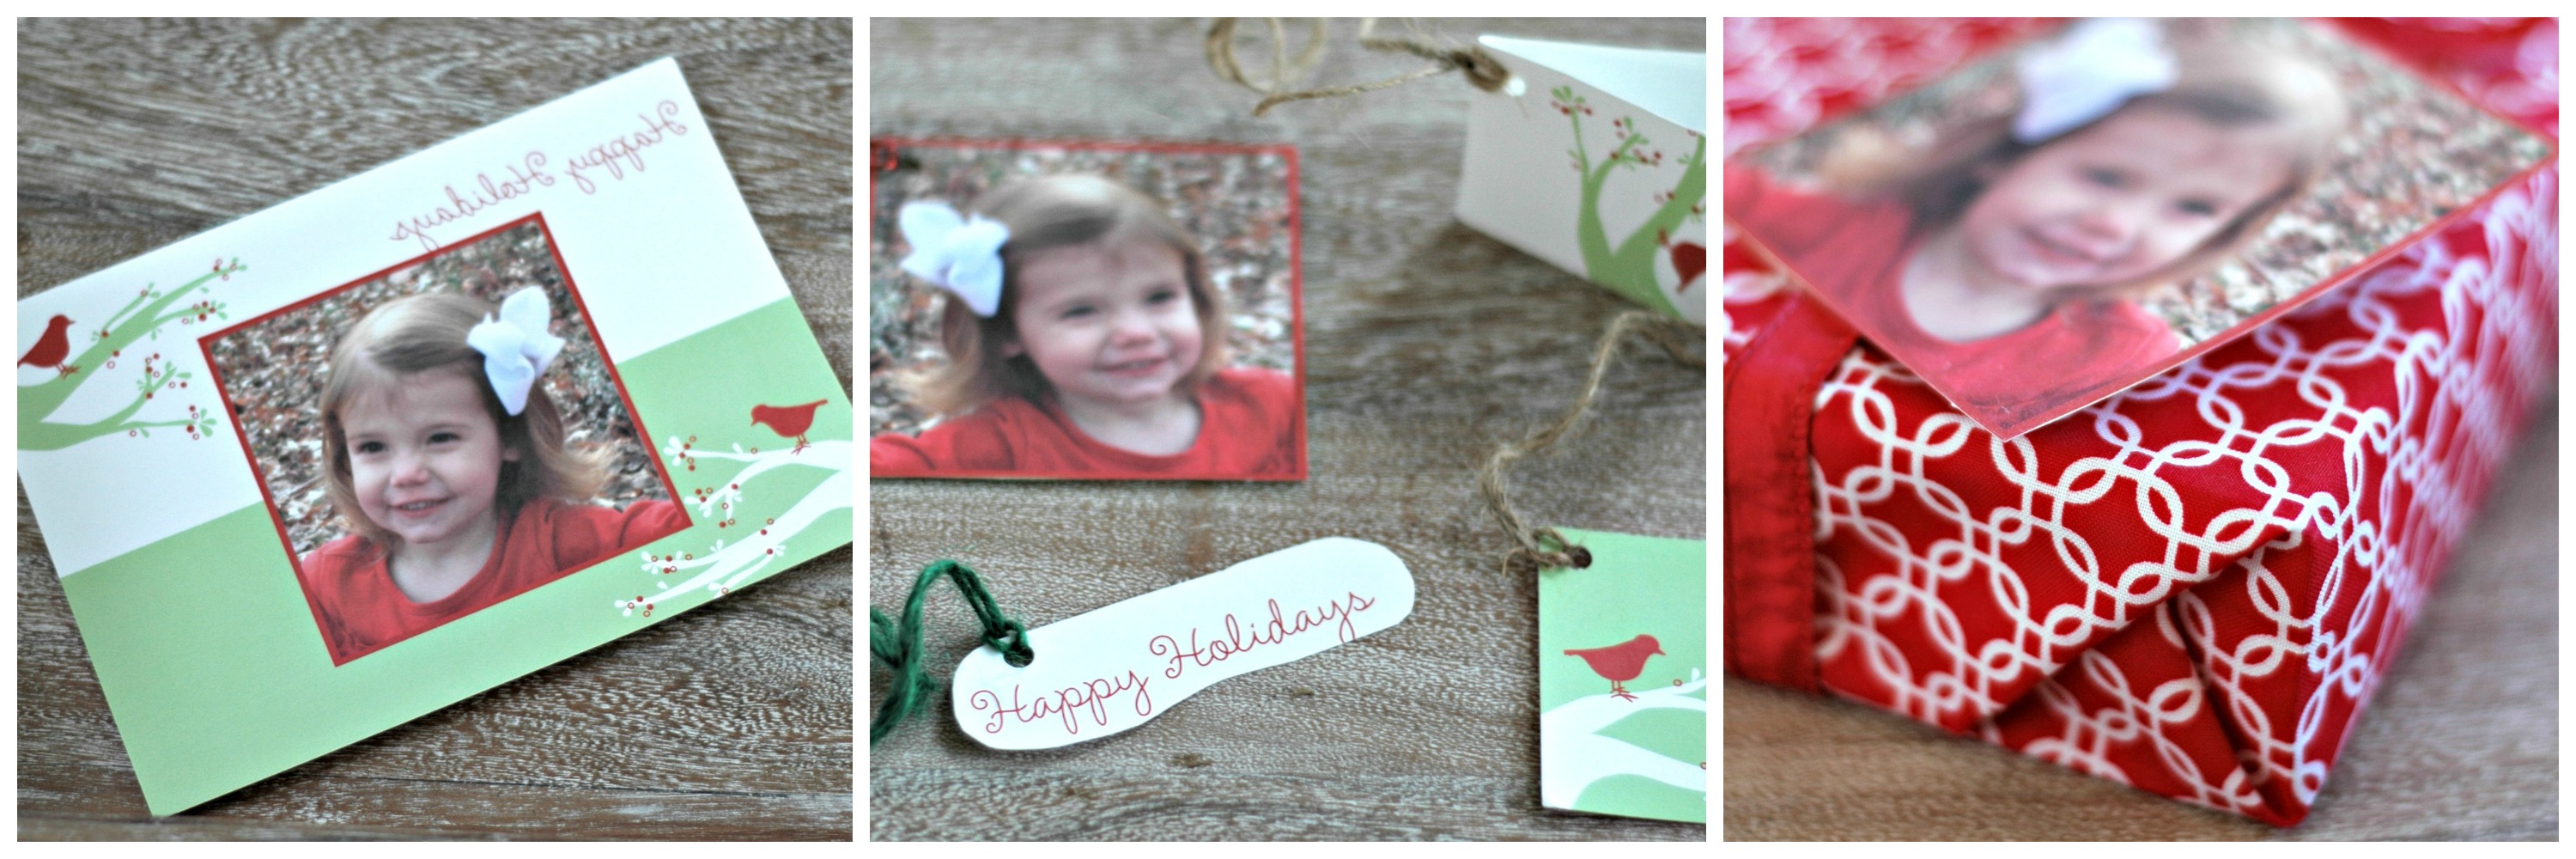 Reuse old Christmas cards